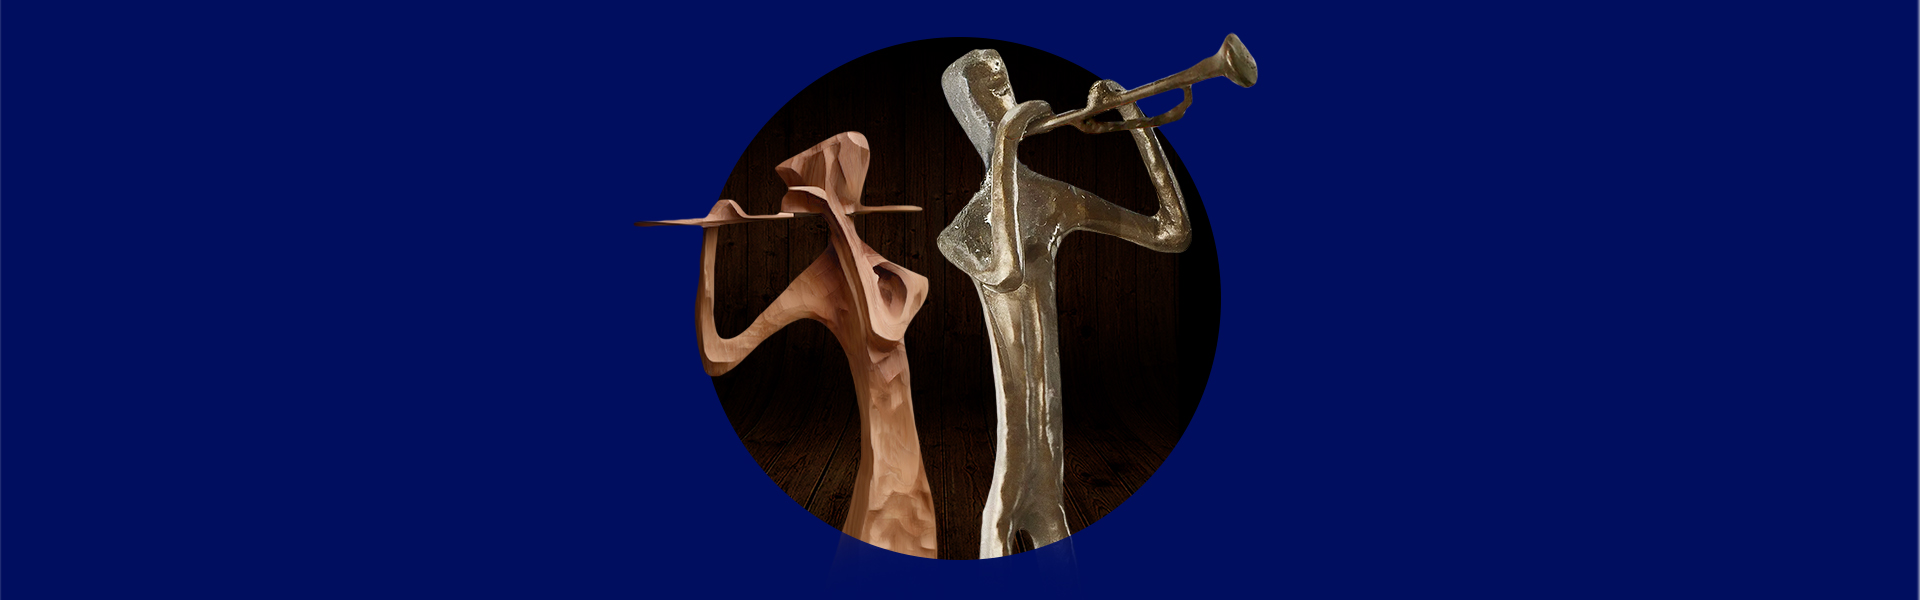 ORCHESTRA FORMULA. WOOD AND BRONZE